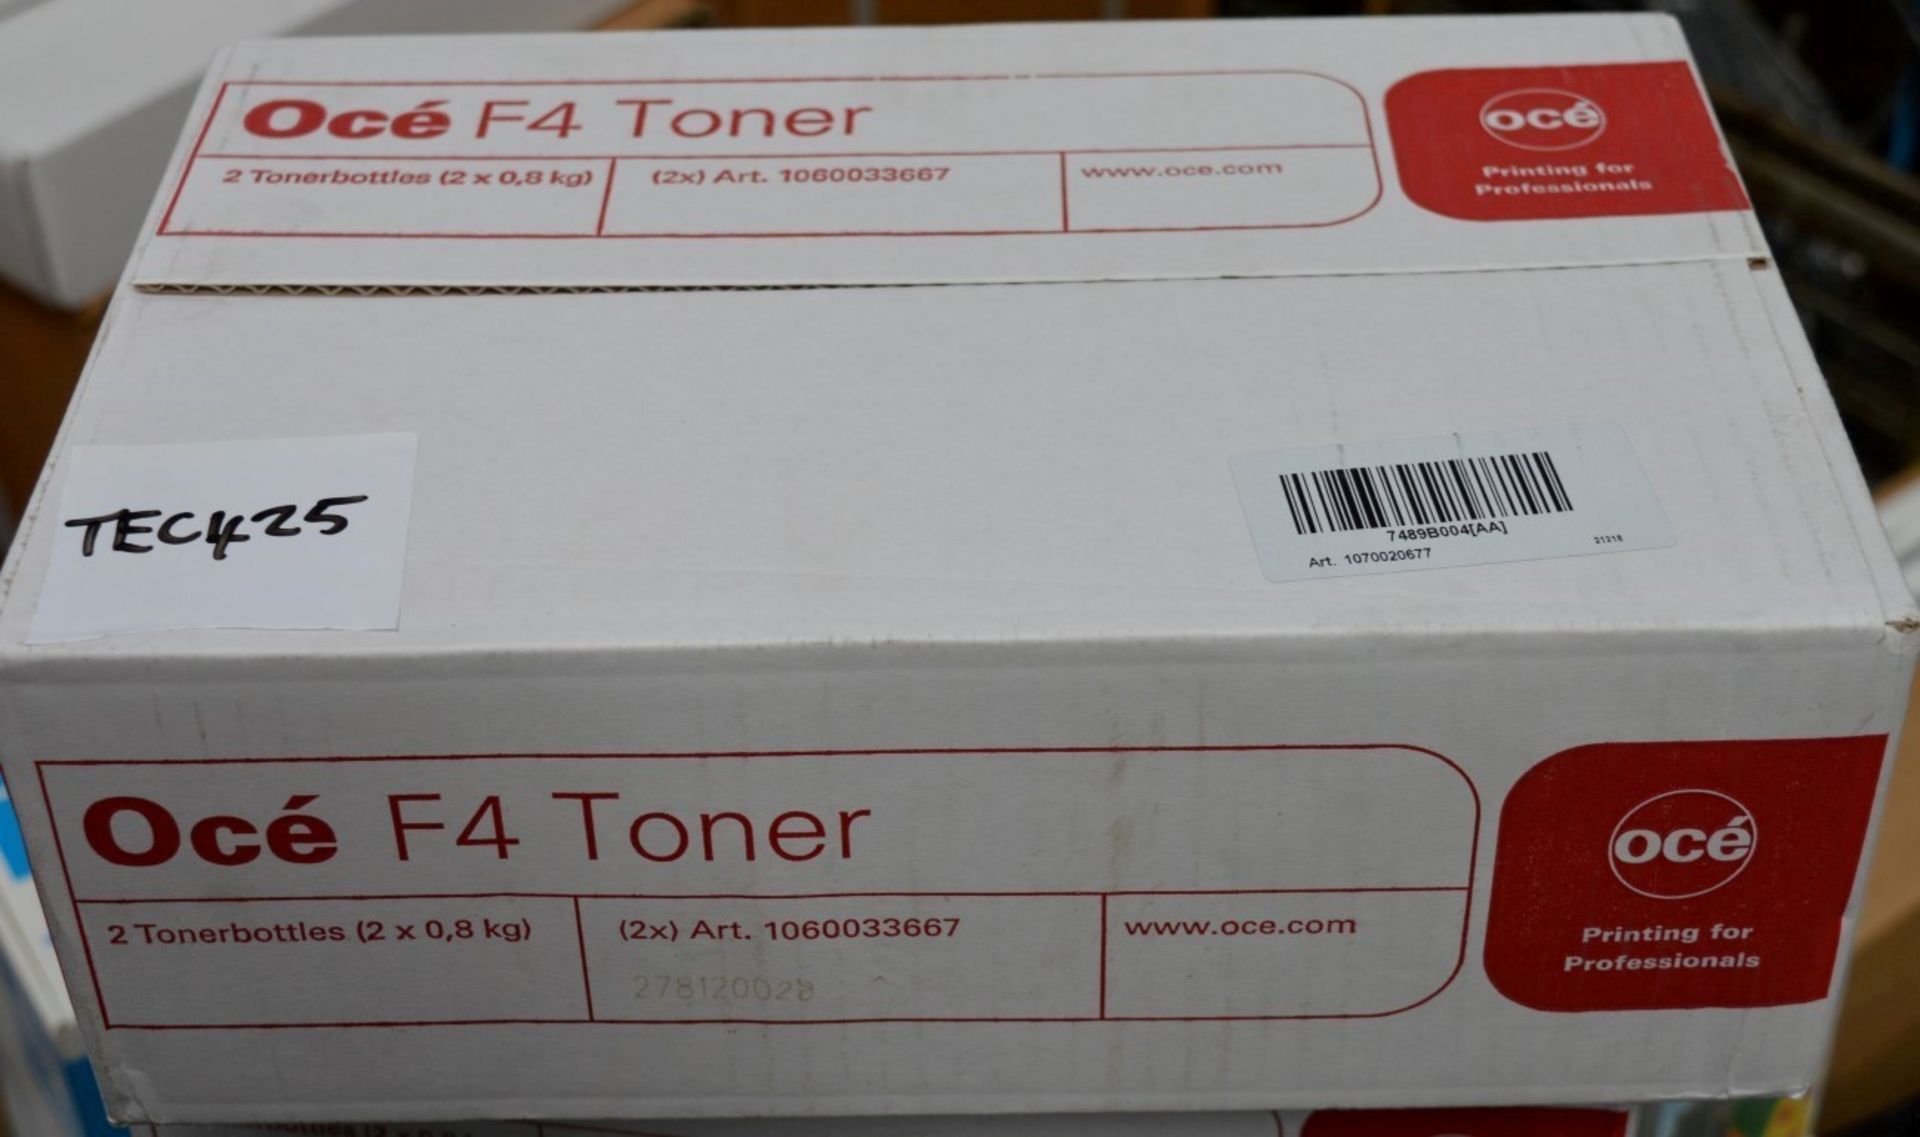 1 x Pack of Two OCE F4 Toner Cartridges - New Sealed Stock - Genuine OCE Toners - Part Number